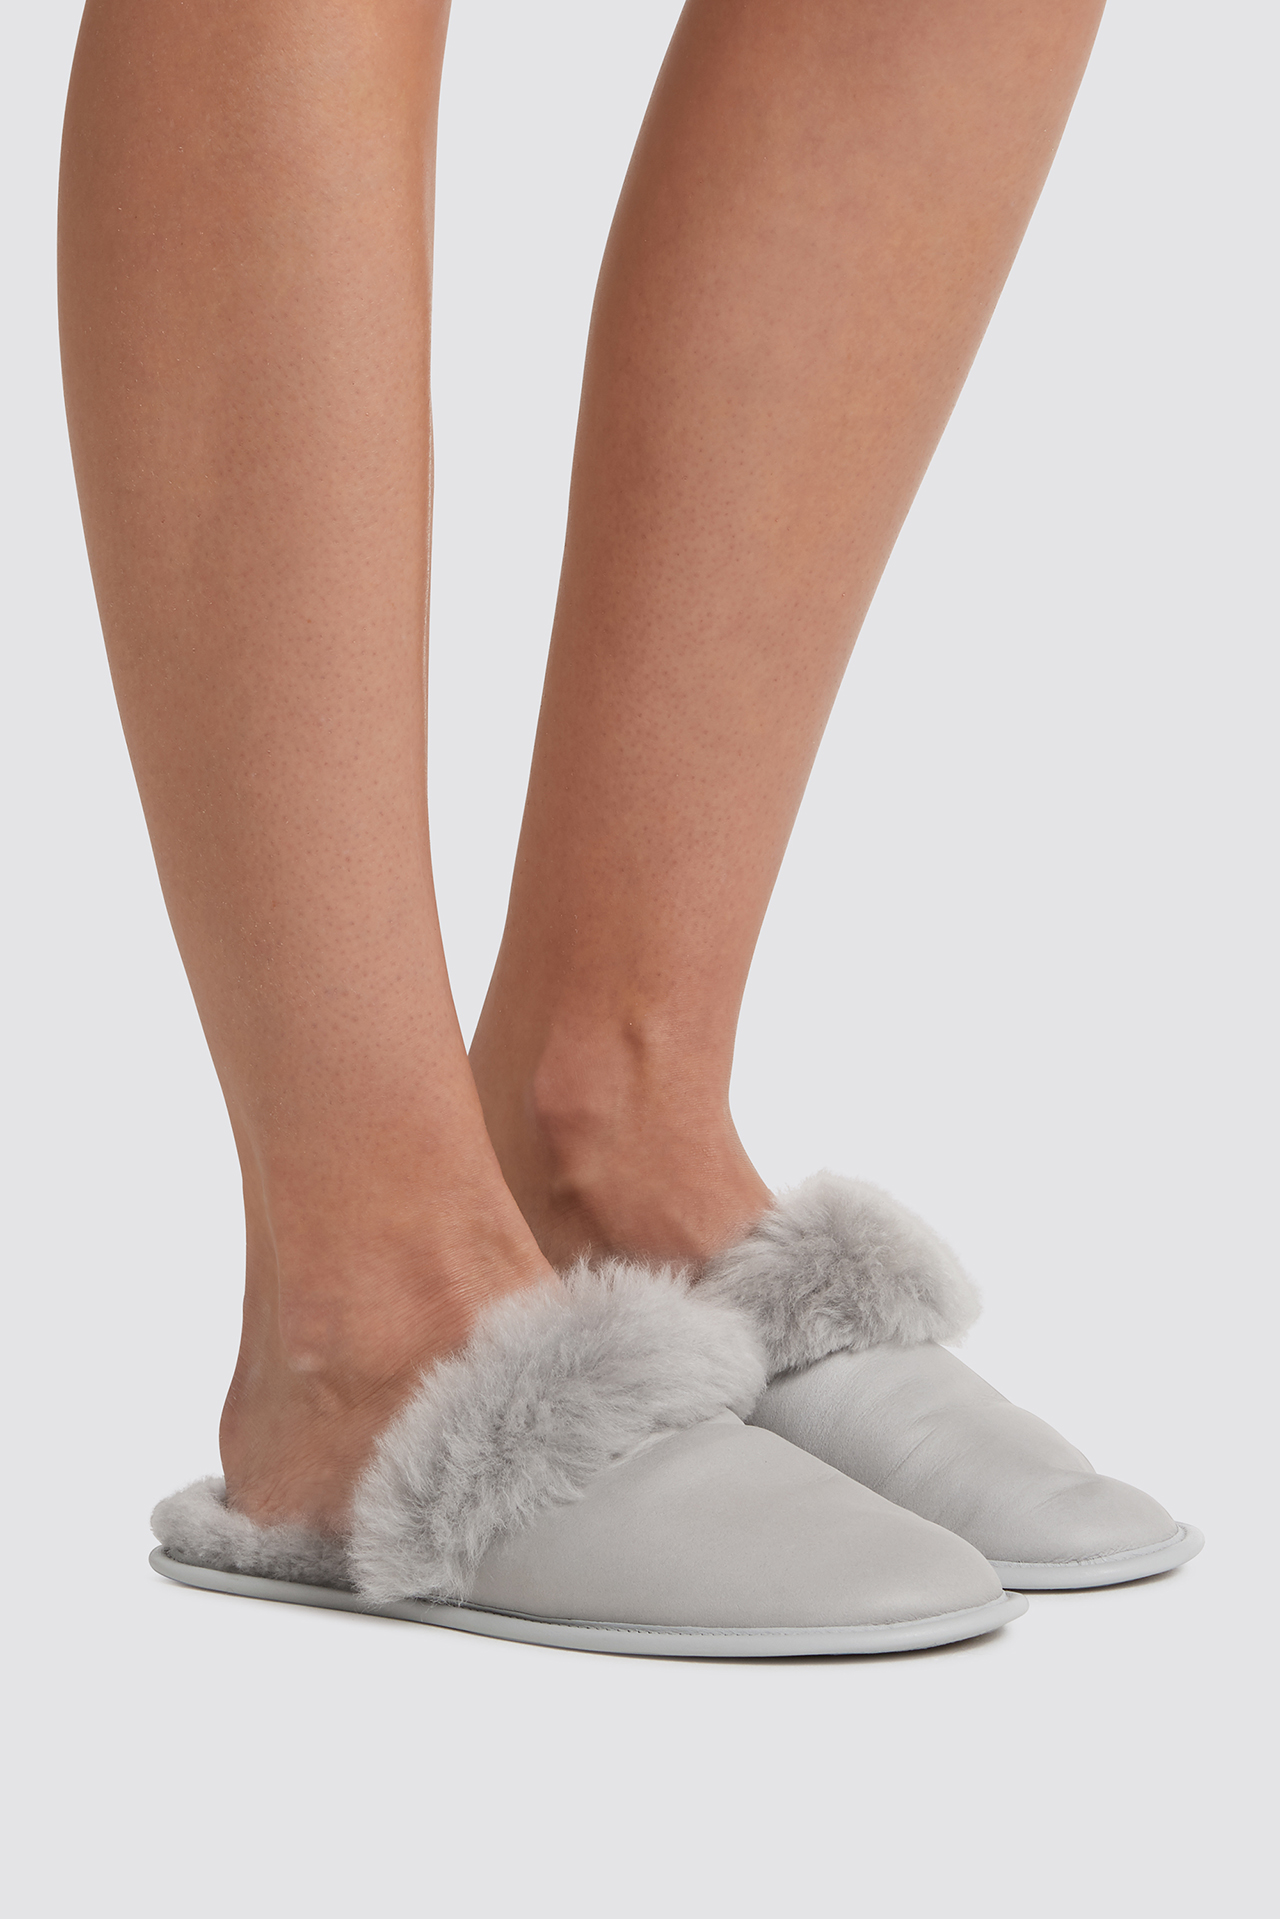 gushlow-and-cole-shearling-7-slippers-1